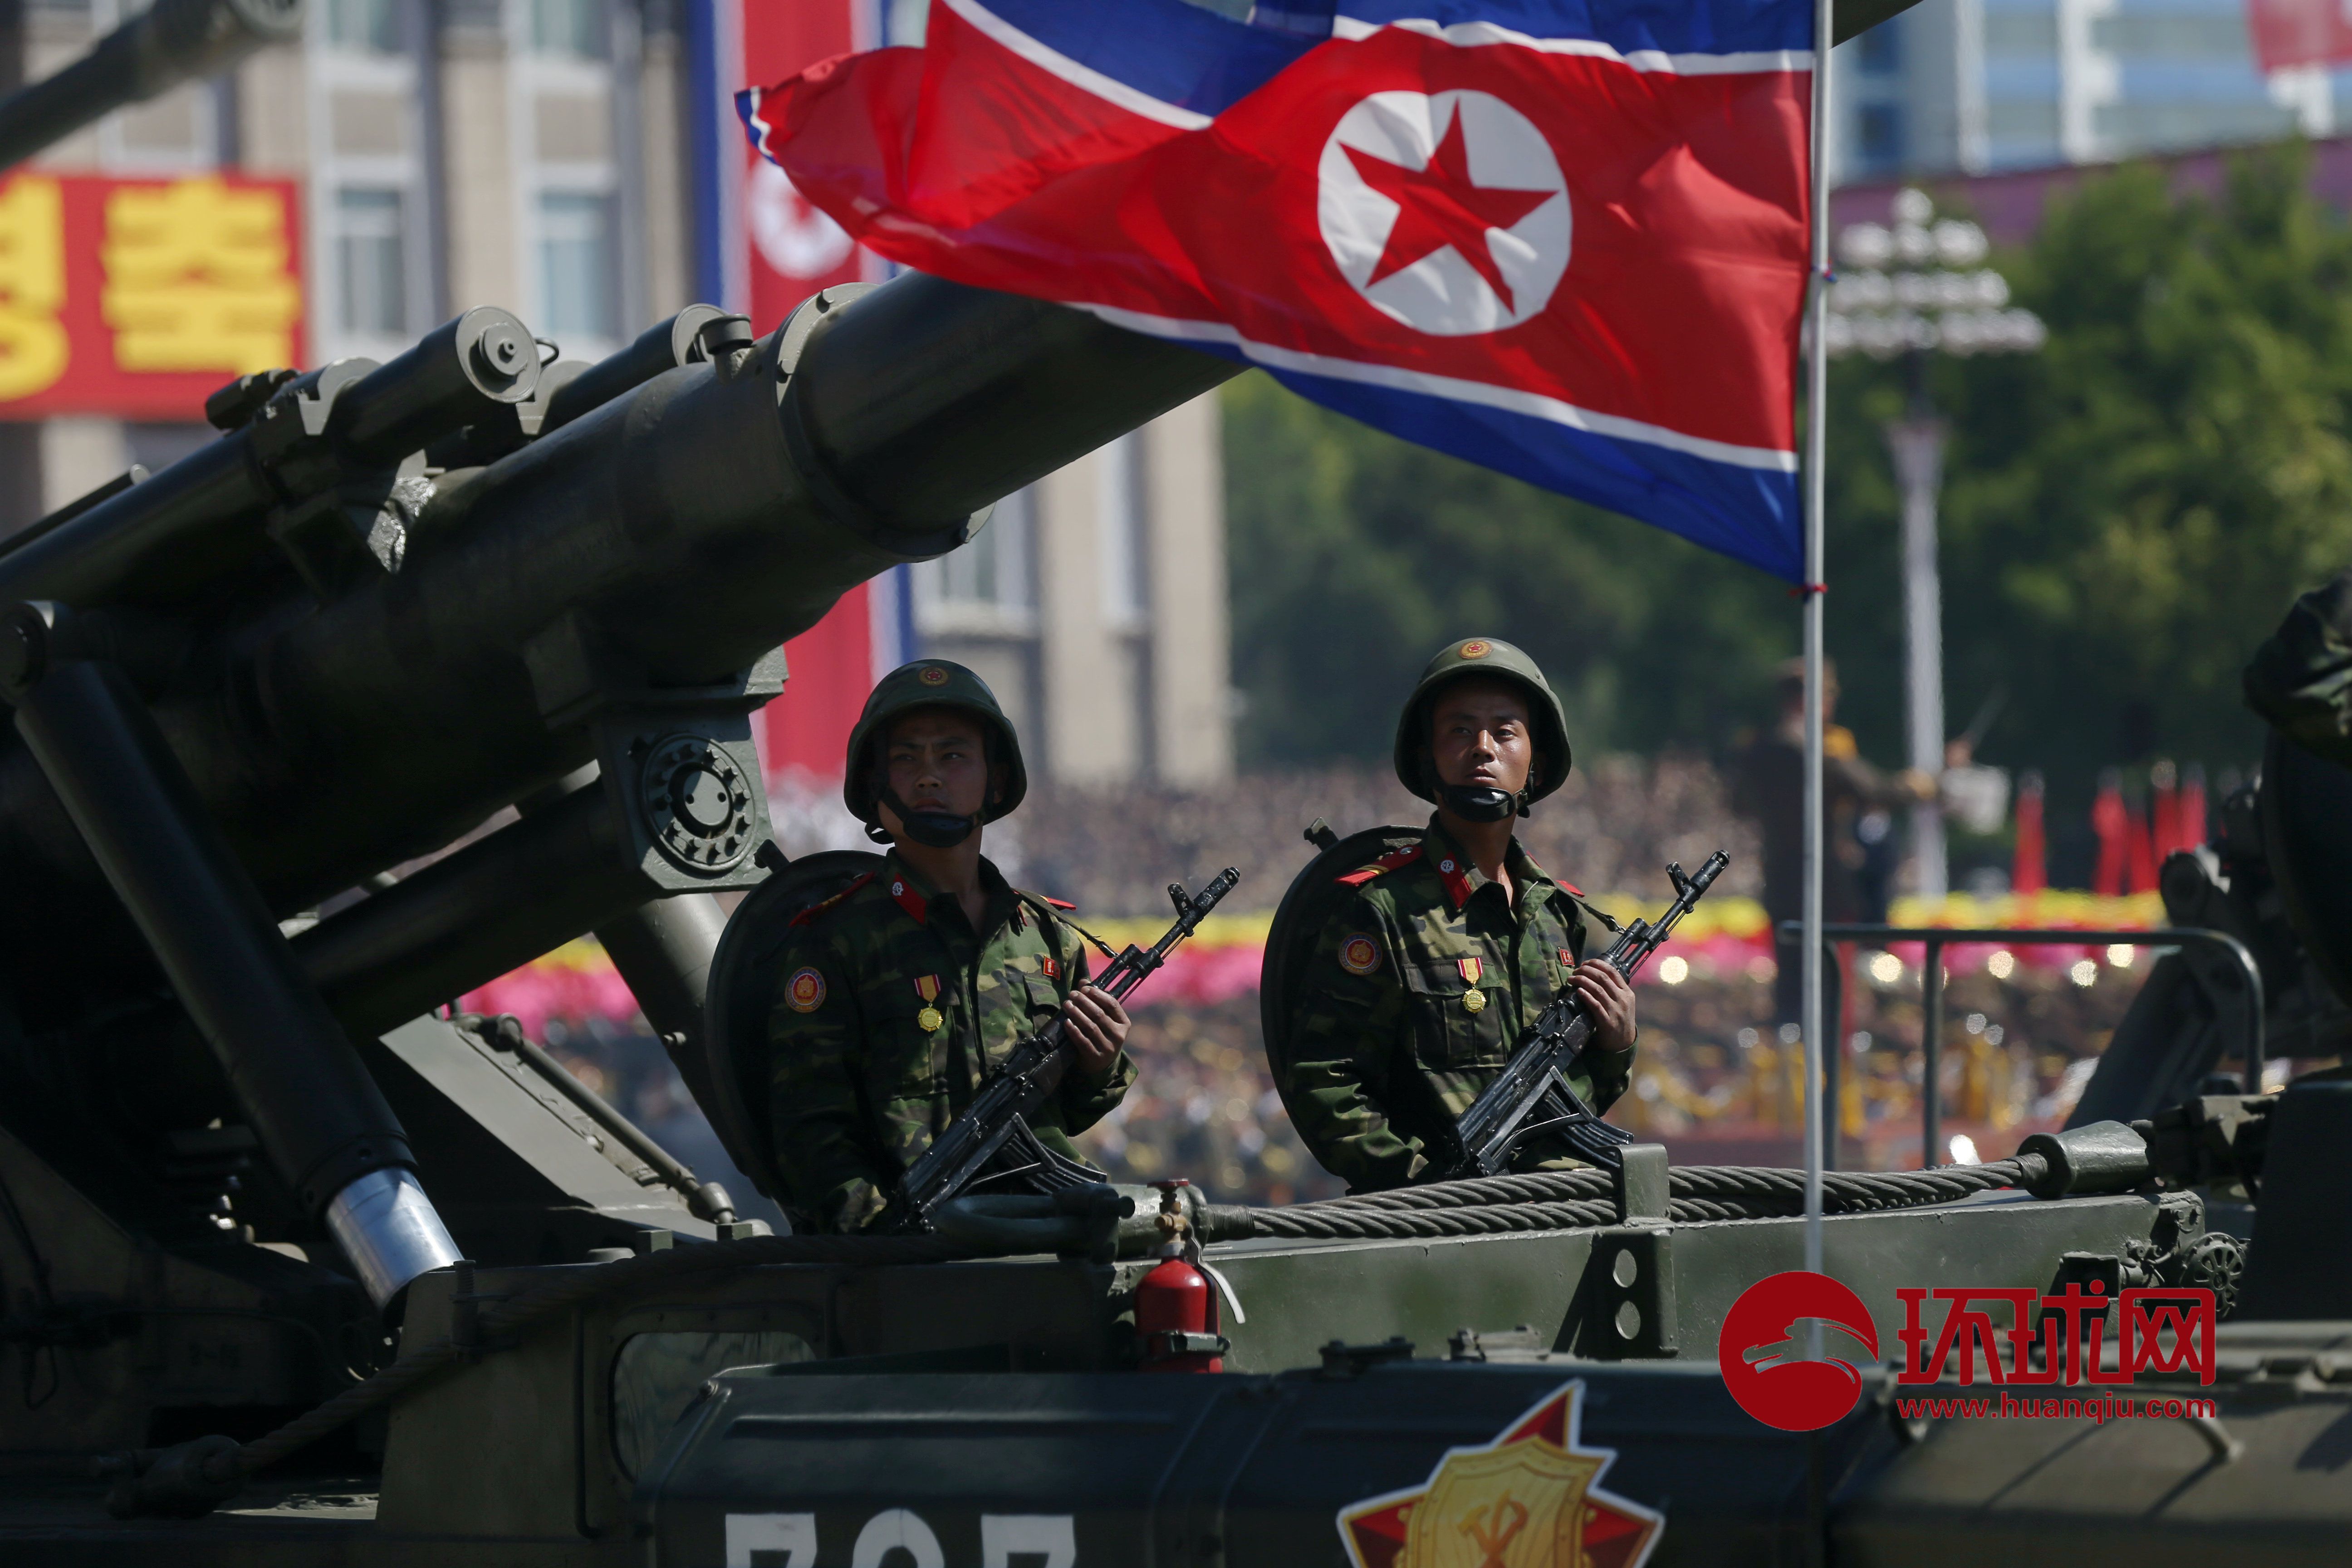 Watch this incredible, rare video of the streets of North Korea's ...